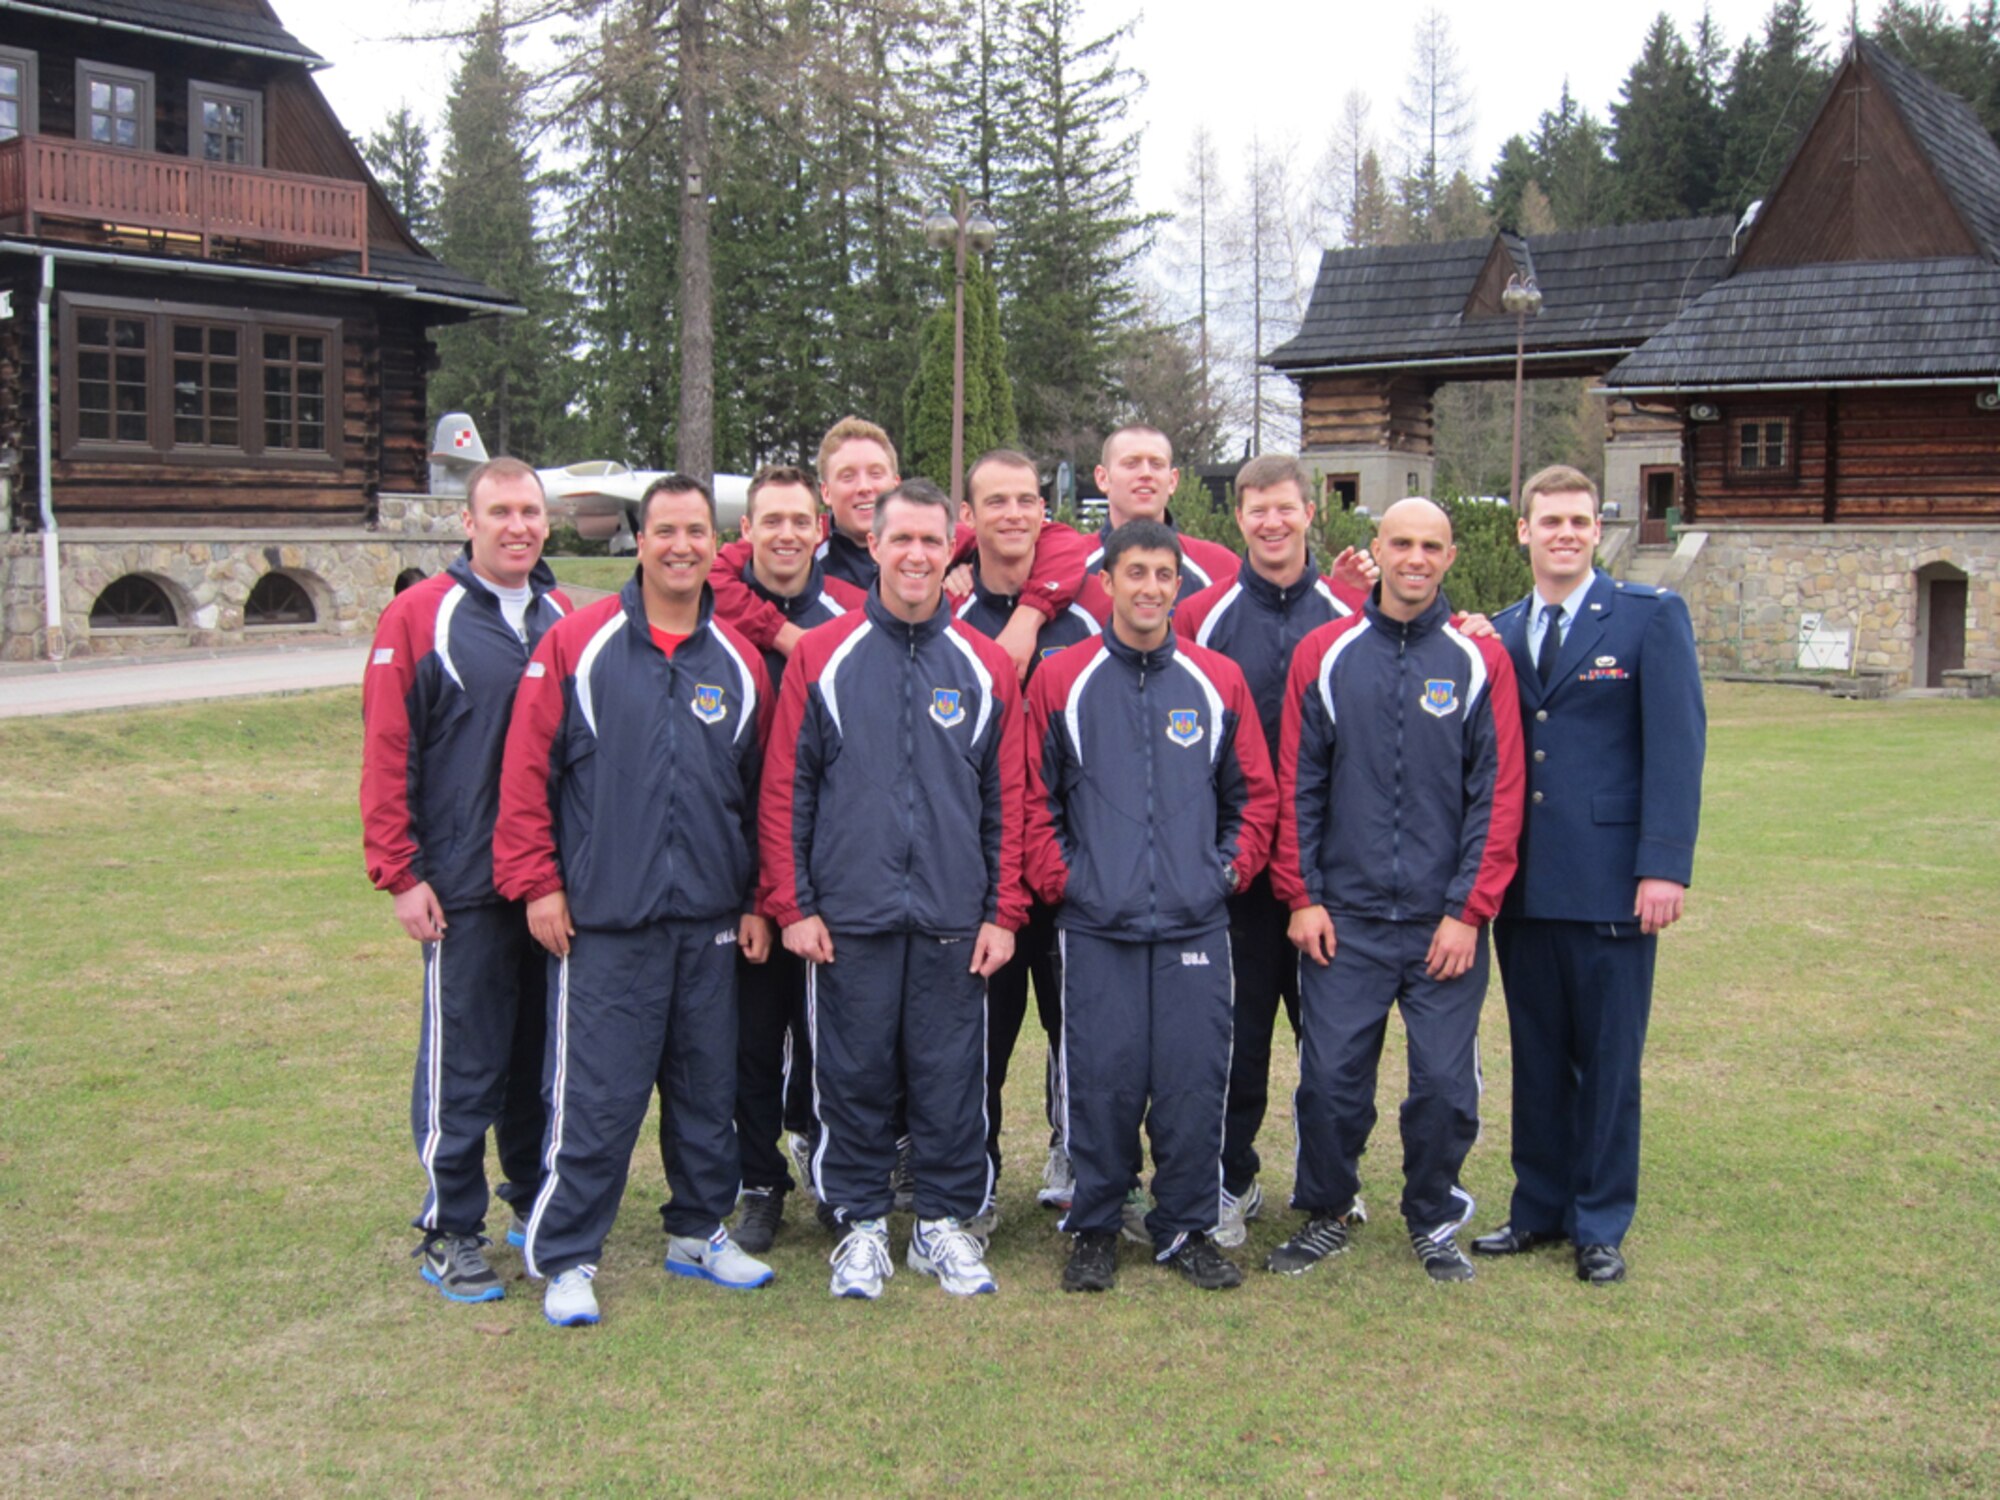 AEDC’s Capt. John Dayton, back center, poses for a group photo with the rest of the Air Force’s swim team April 19 in Zakopane, Poland. Dayton won first place in the 100-meter breaststroke at the Headquarters Allied Air Command Ramstein Swimming Championships. The men’s team placed second overall in the competition, which five other countries also competed in. (Photo provided)